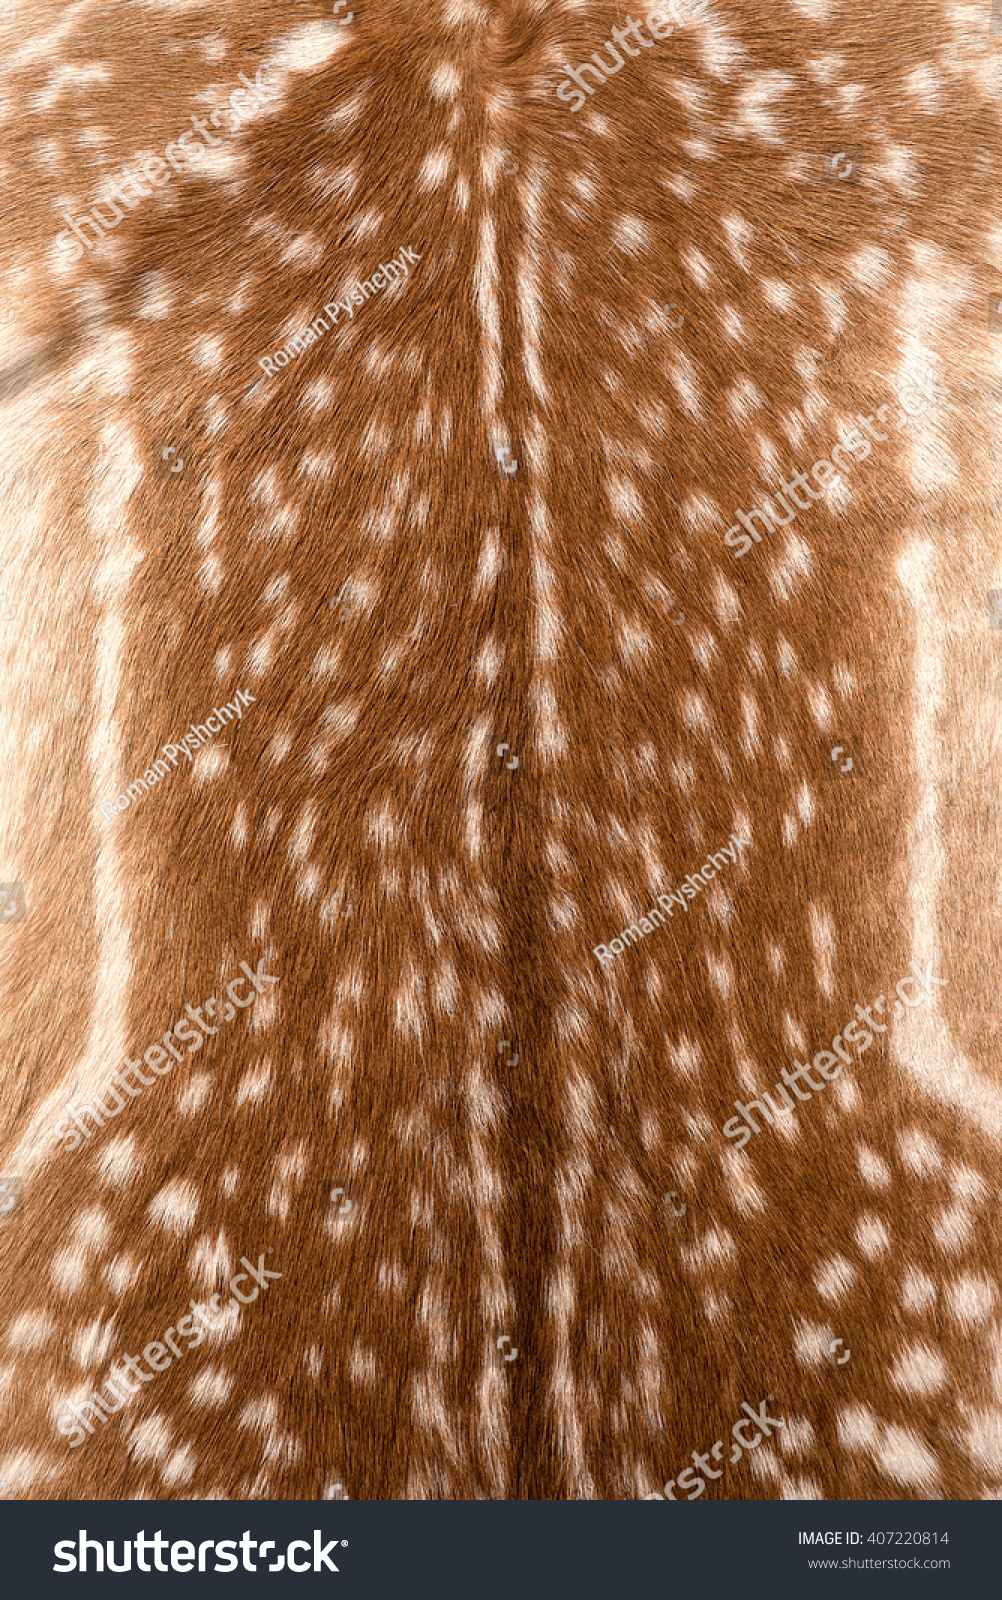 Texture Real Axis Sika Deer Fur Animals Wildlife Stock Image